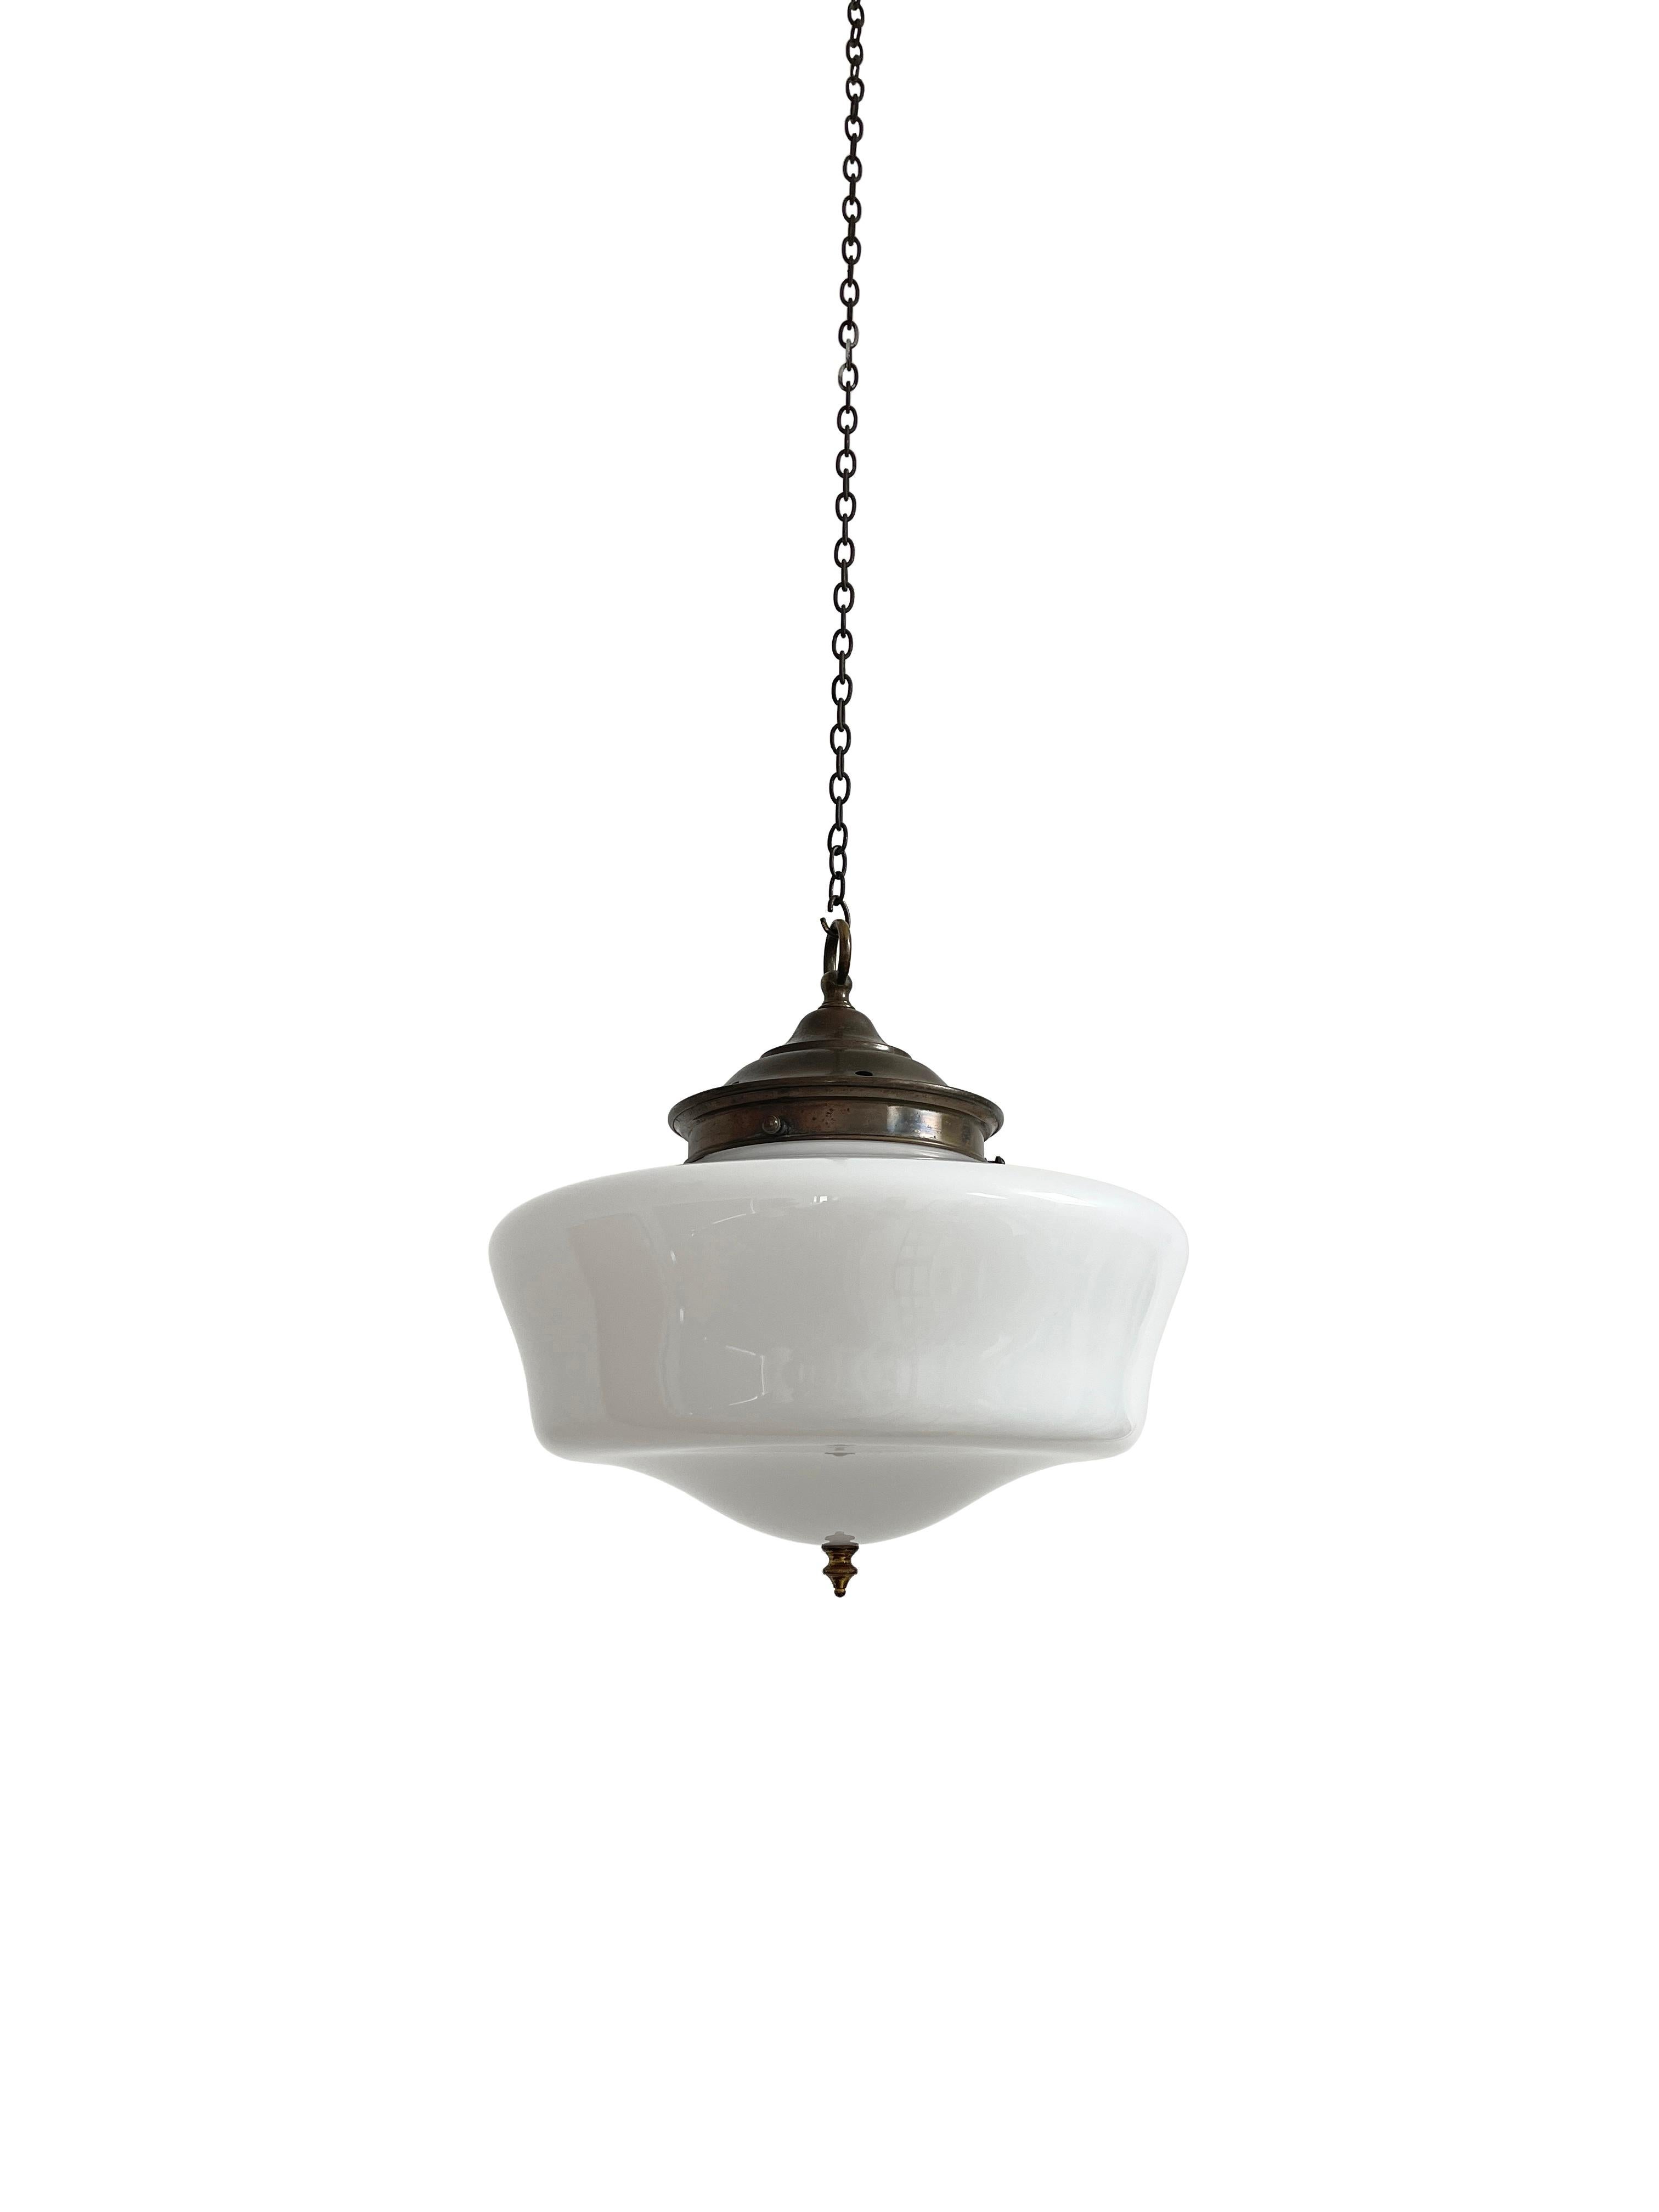 - A beautiful church opaline pendant light, English circa 1930.
- The light has its original gallery and brass finial to the underneath of the shade.
- Wear commensurate with age, all in good condition, there is a very light fissure immediately